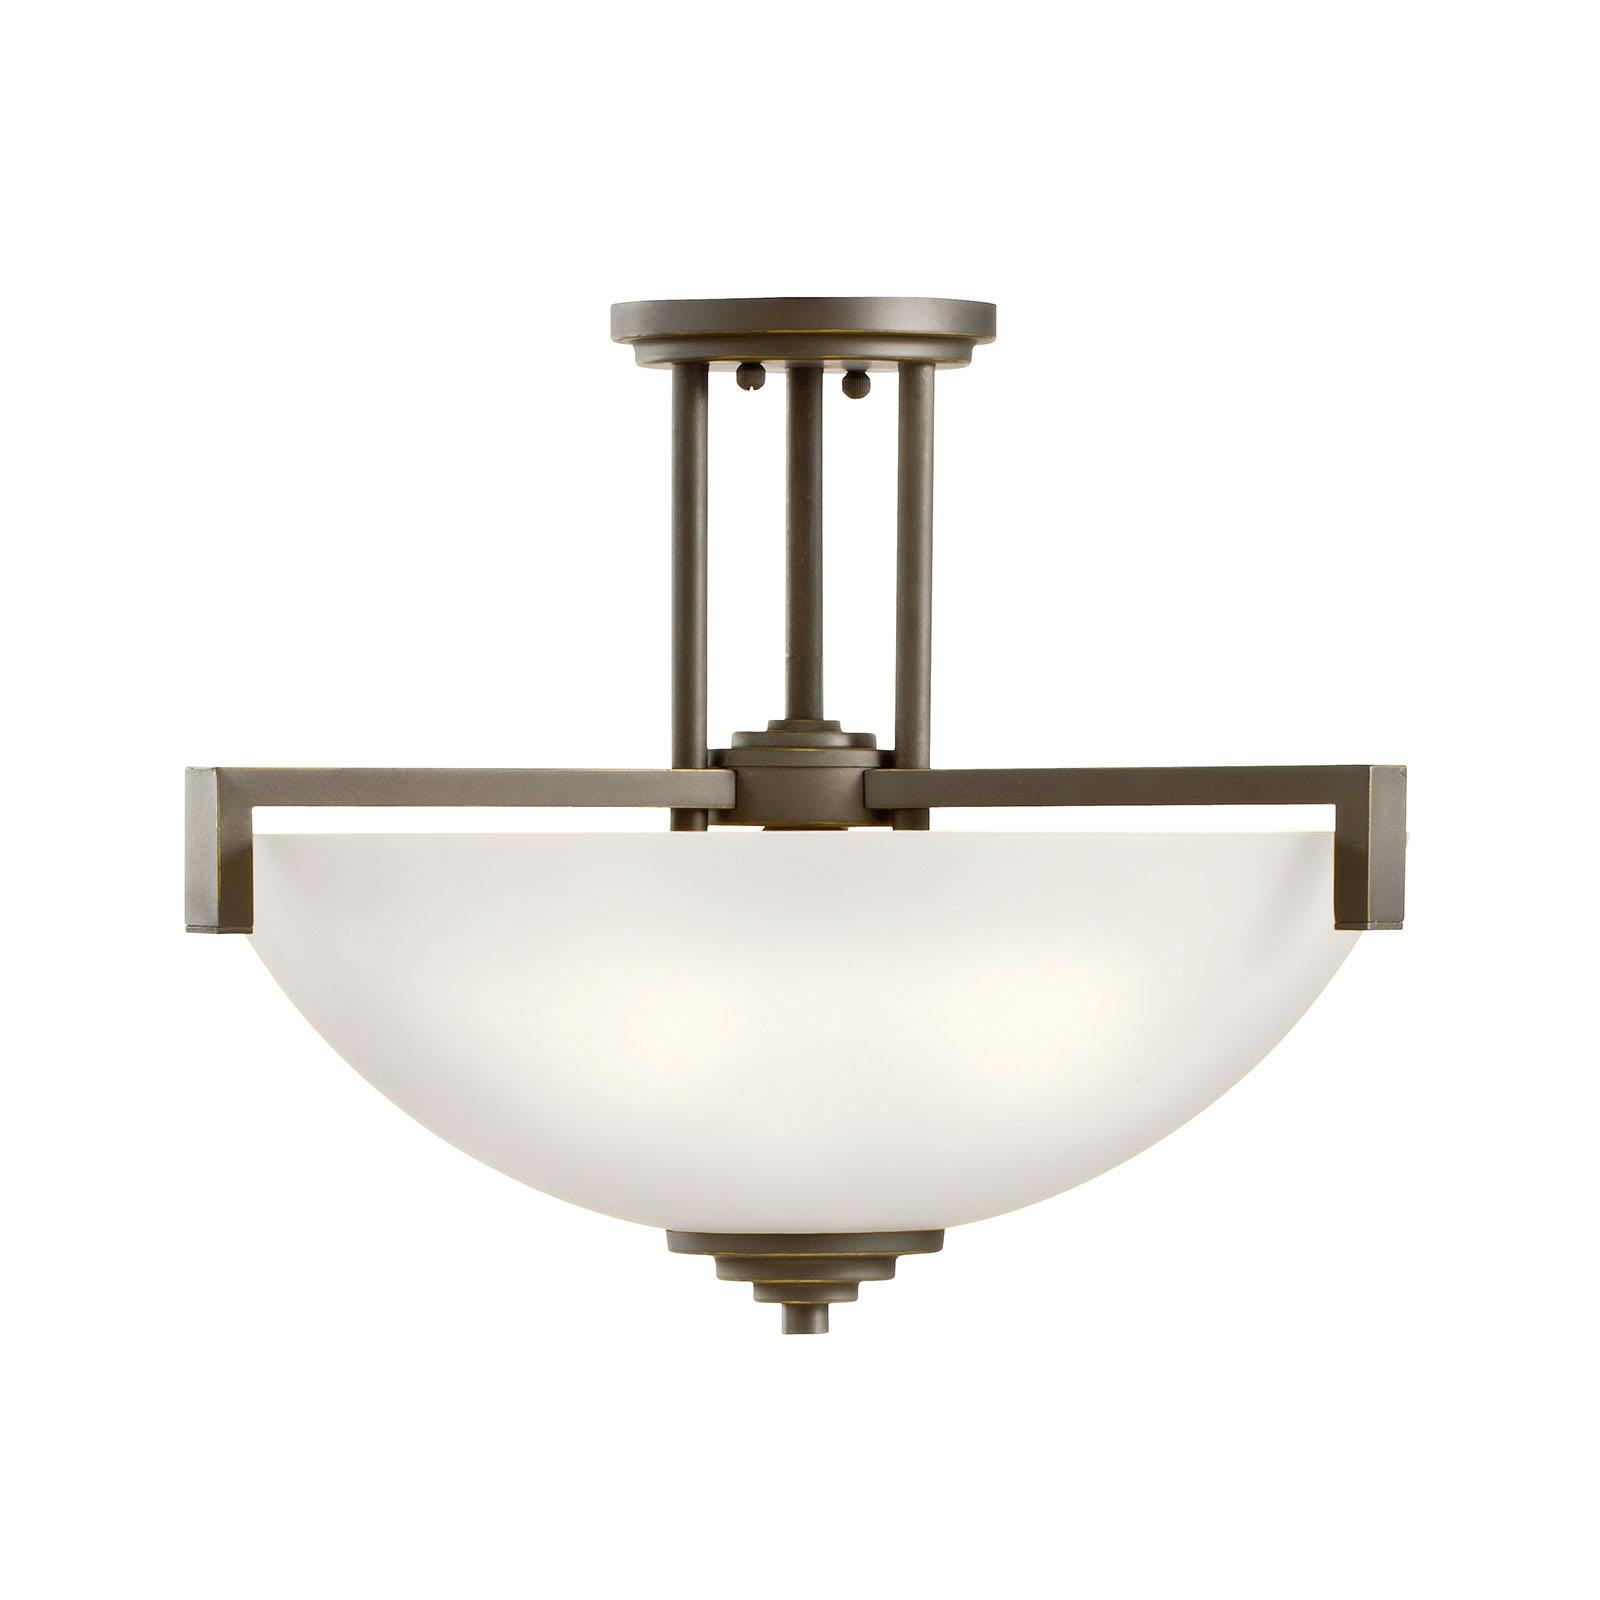 Product image of the 3797OZS shown hung as a semi flush